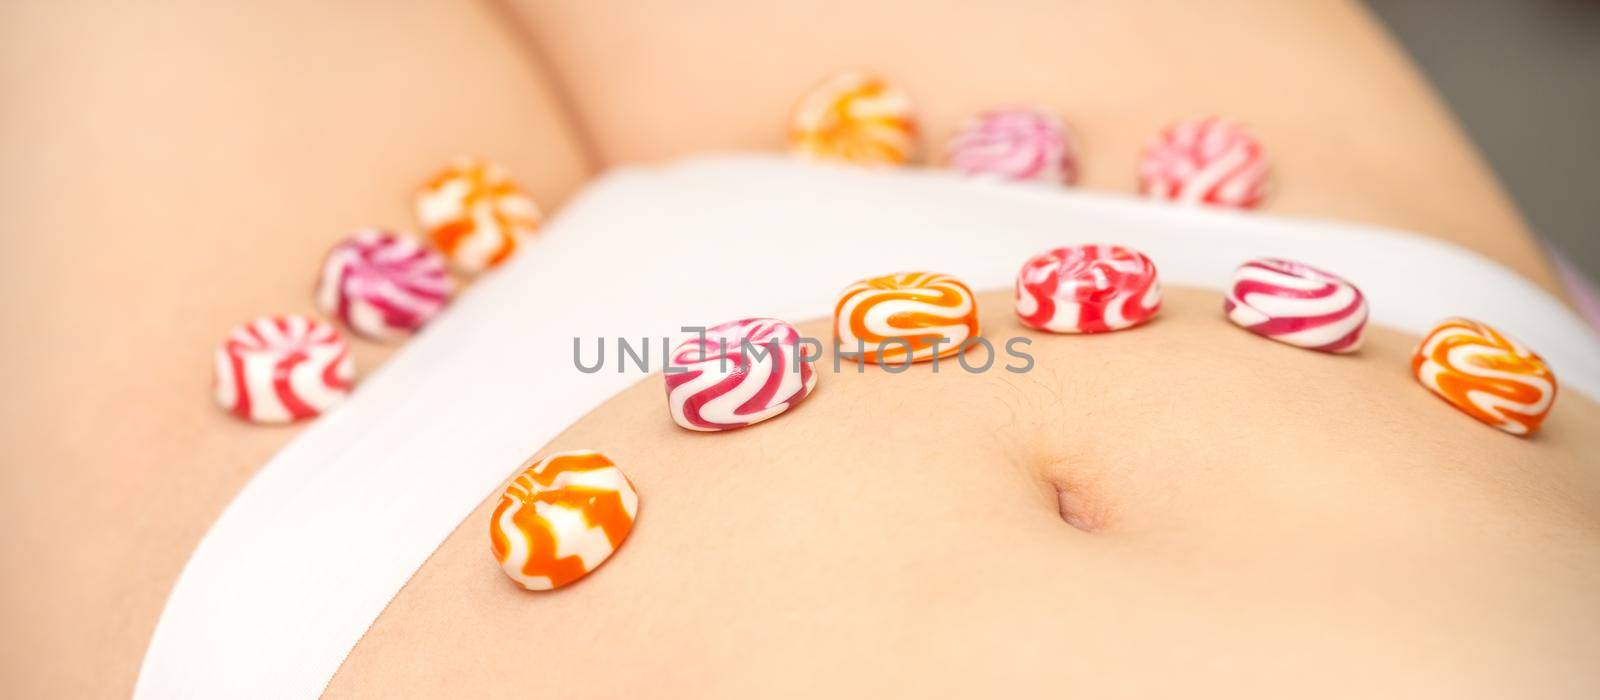 Concept of intimate depilation, intimate waxing, depilation. Round candies lying down in a row on the female bikini zone, intimate area, close up